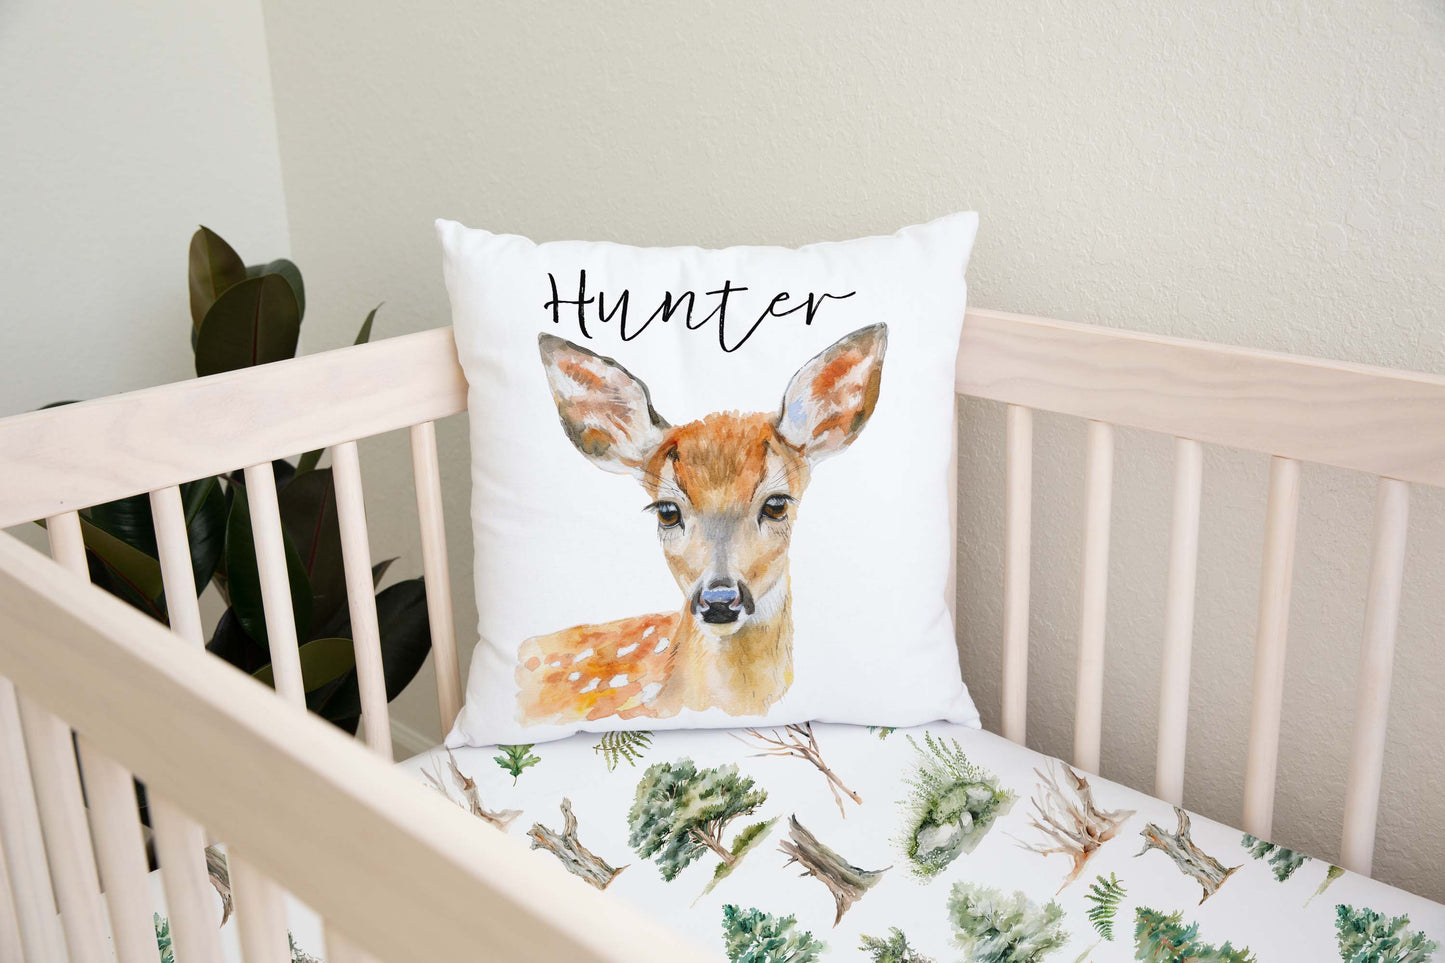 Deer Personalized Pillow cover, Woodland Nursery Decor